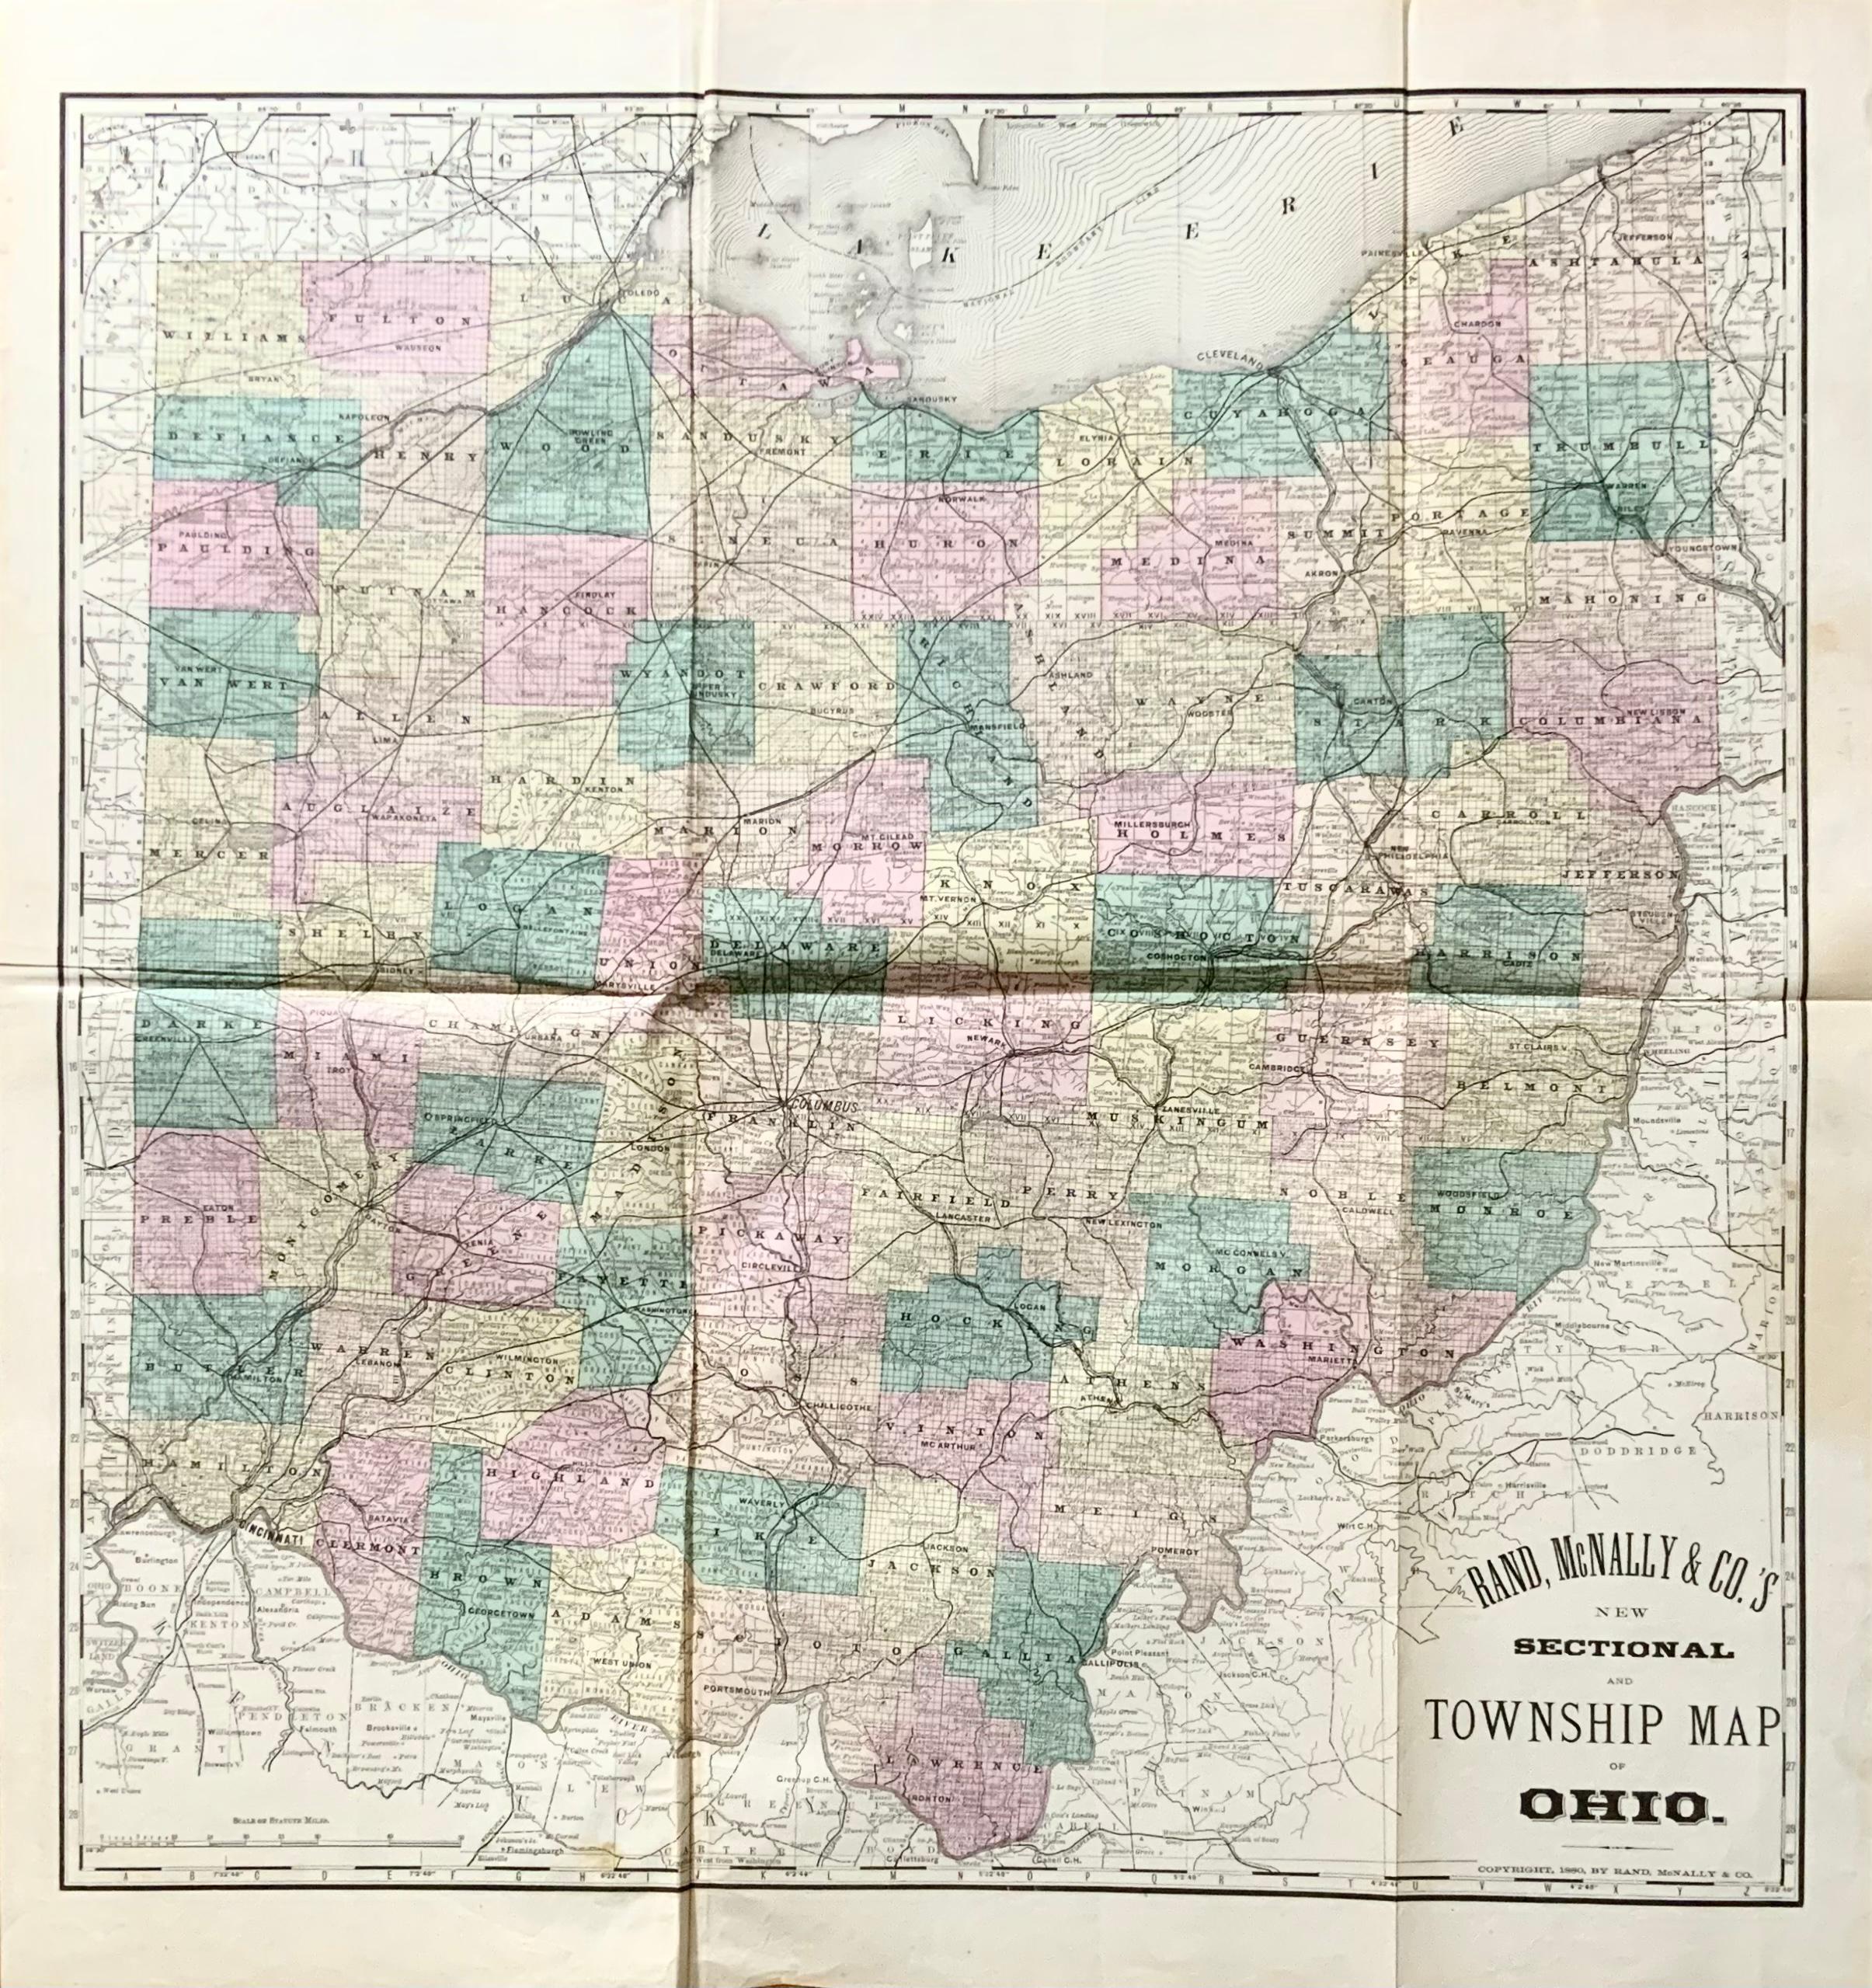 Rand, McNally & Co.'s New Sectional And Township Map of Ohio

24.8 x 24.3 inches folding into 6 sections. Colour printed in part.

Chicago, 1880.

Scale: 1:633,600

Fine early large scale map which was also issued in pocket form.

With